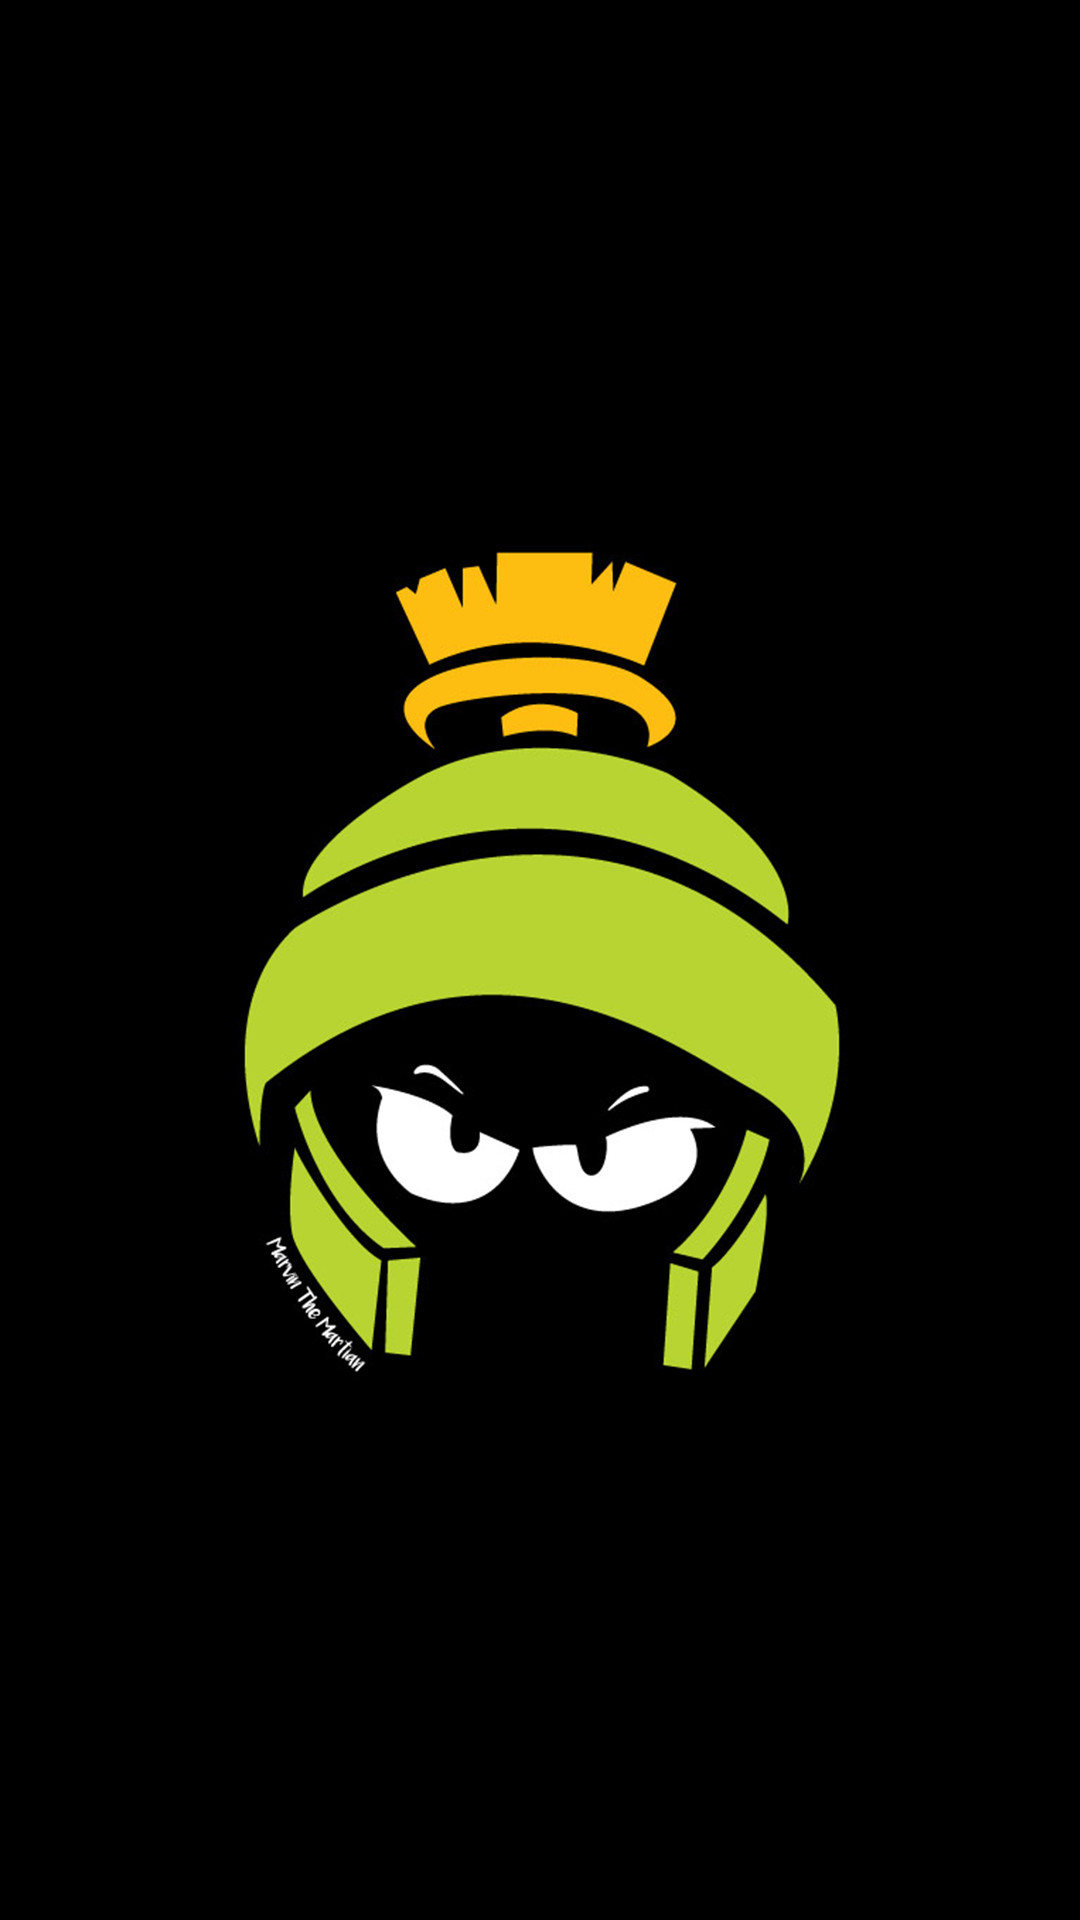 1080x1920, Ios Wallpapers, Cartoon Characters, Looney - Iphone Marvin The  Martian - 1080x1920 Wallpaper 